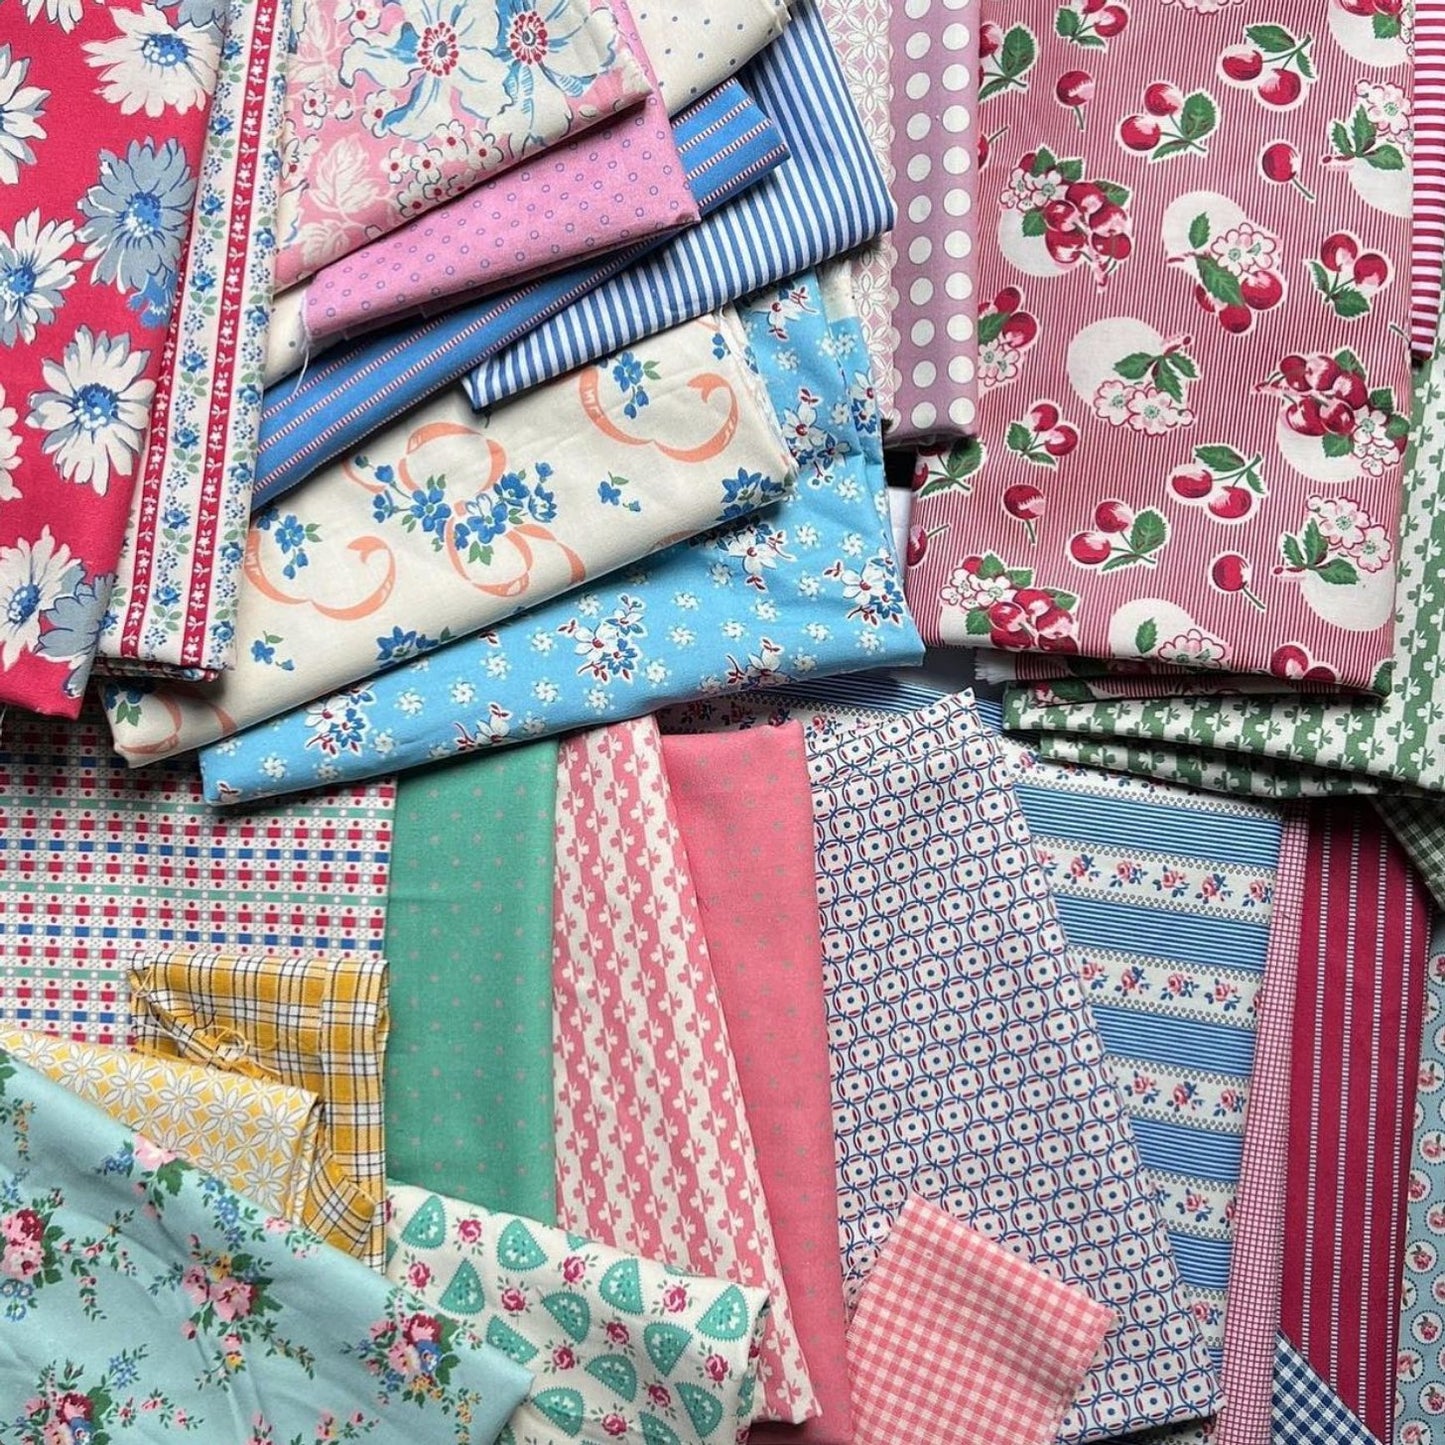 Ruby's Coverlet Fat Quarter Bundle by Kim Hurley of L'uccello for Devonstone